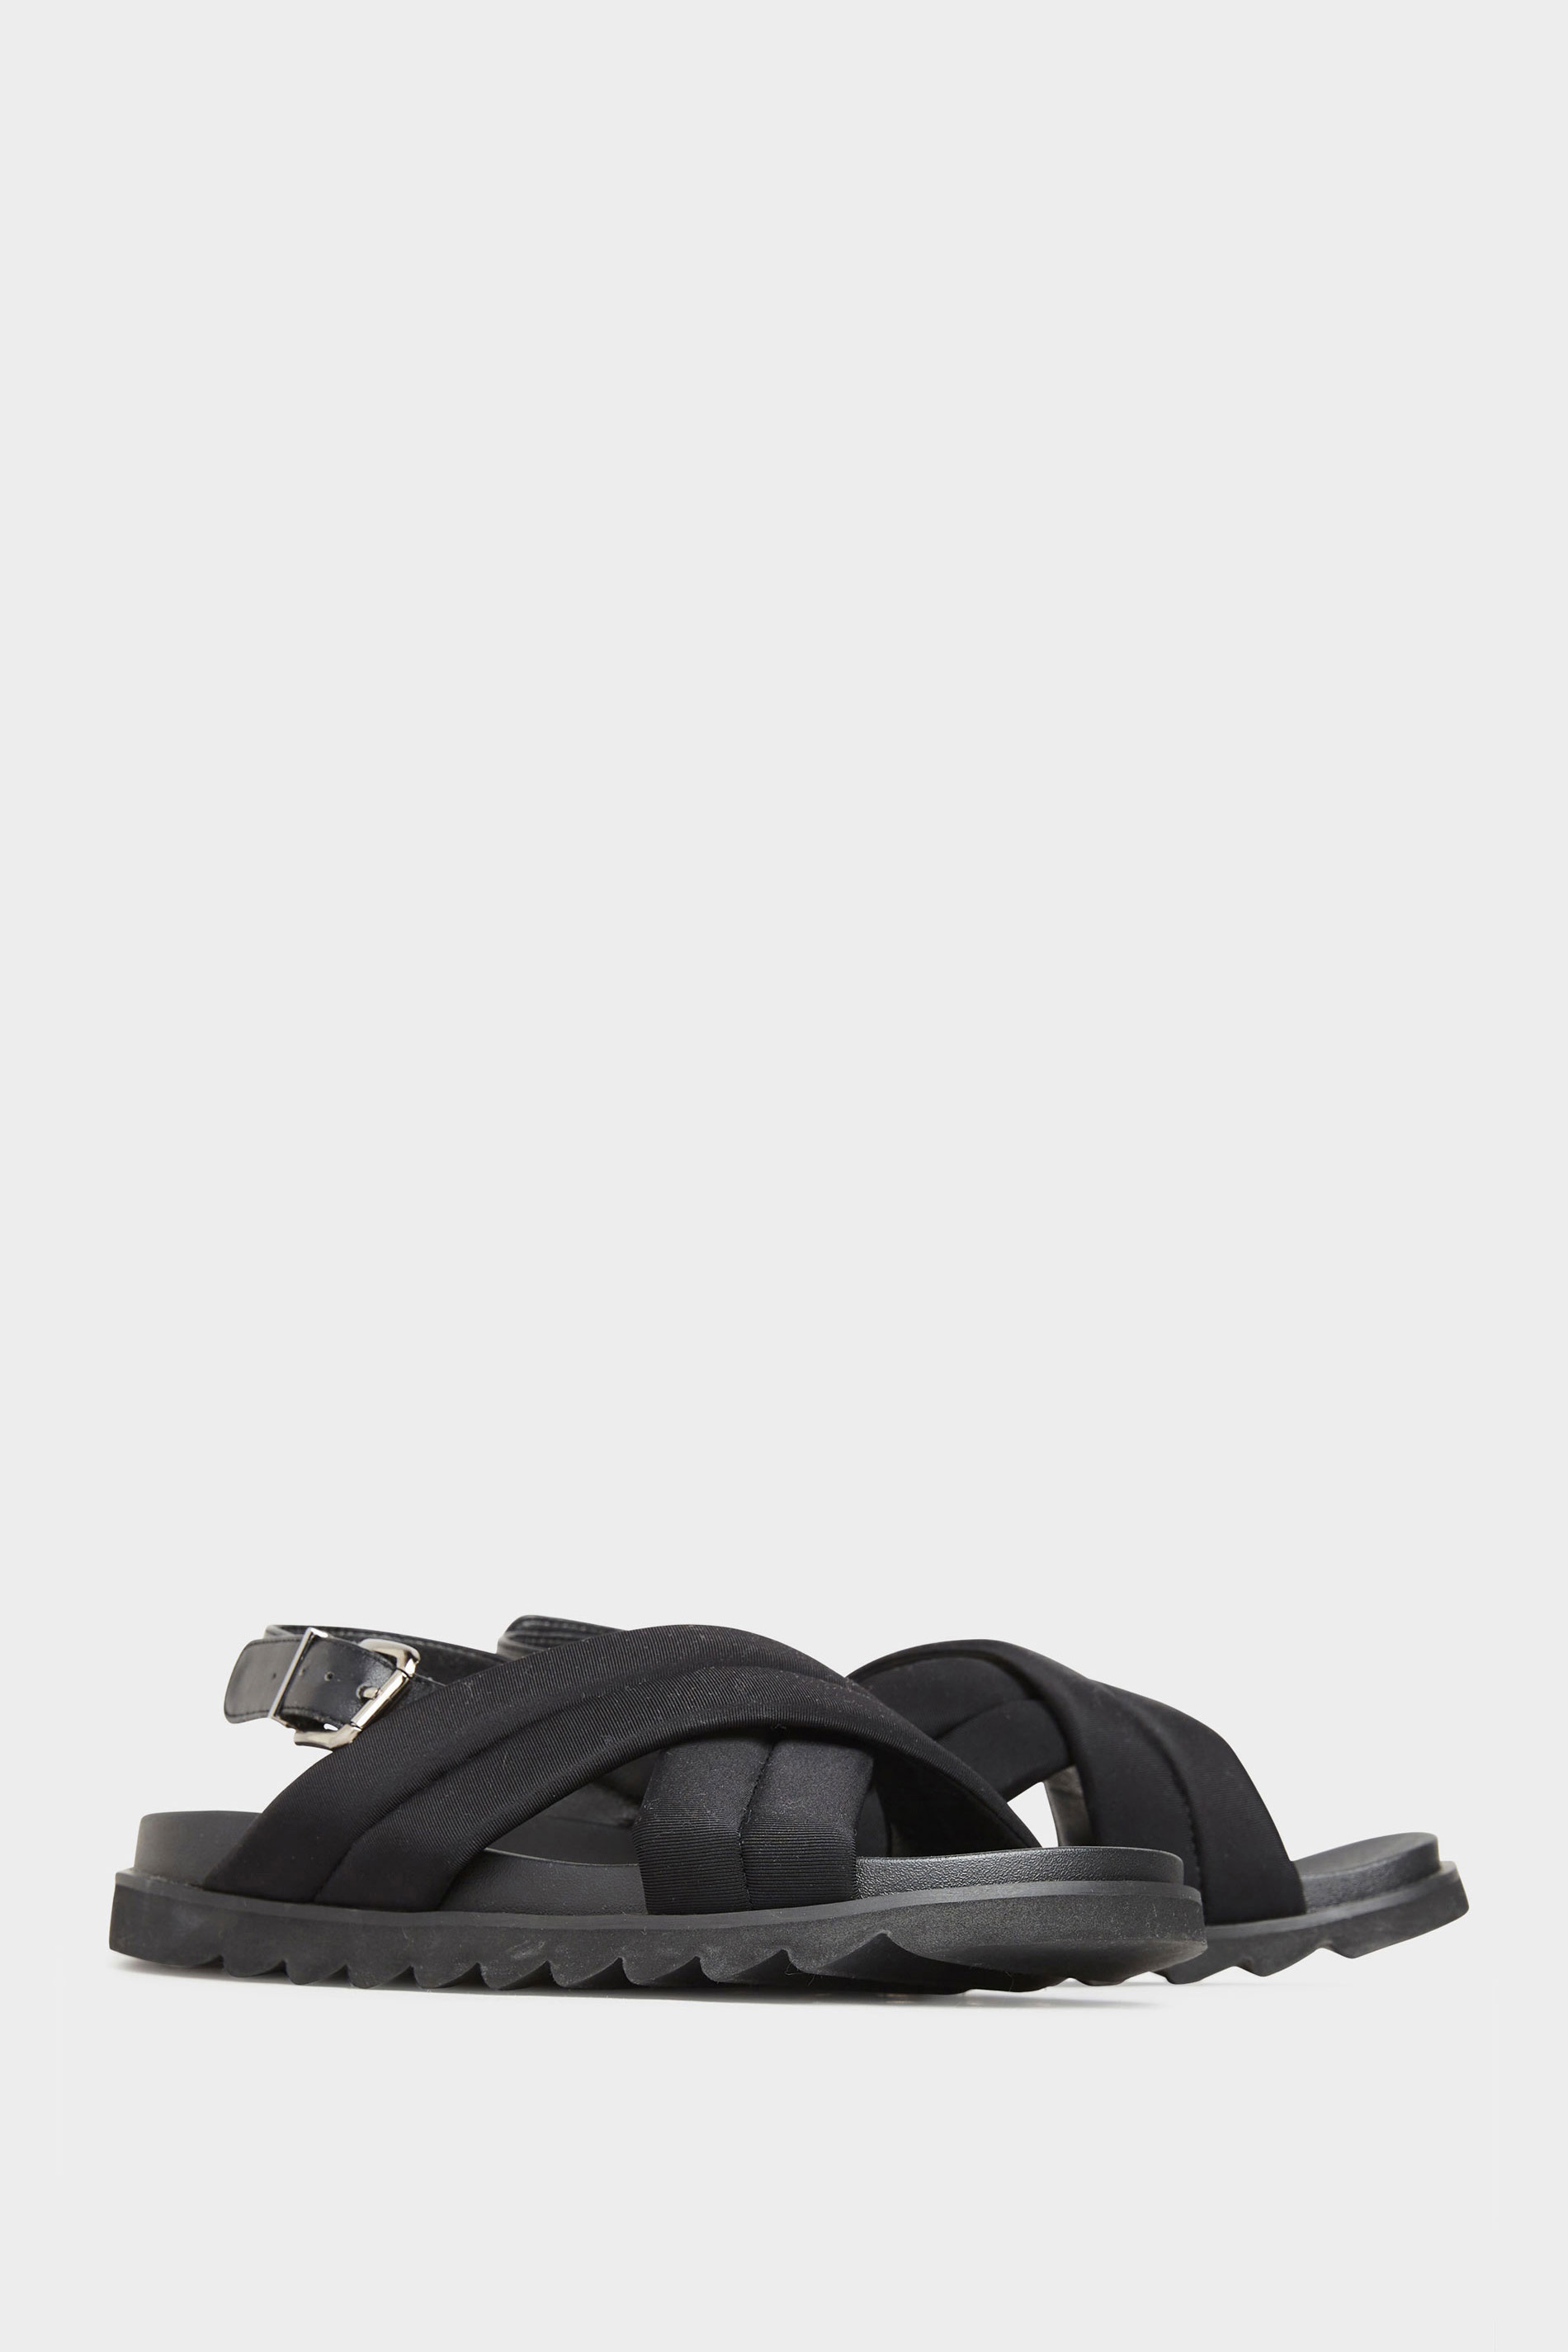 LIMITED COLLECTION Black Padded Sandals In Extra Wide Fit | Yours Clothing 3